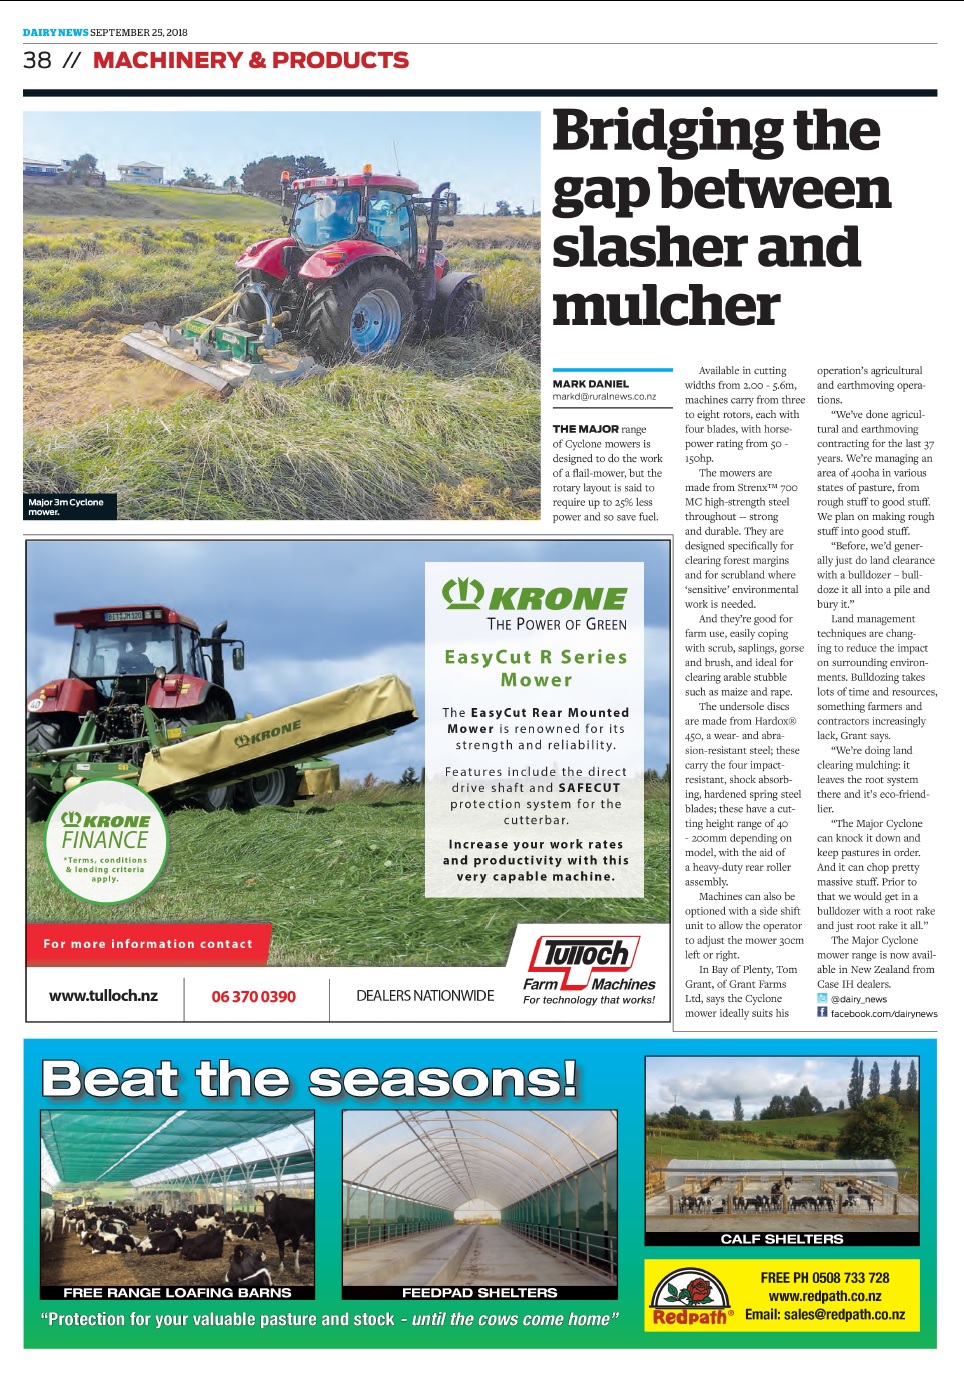 Cyclone in Dairy News NZ, Tom Grant